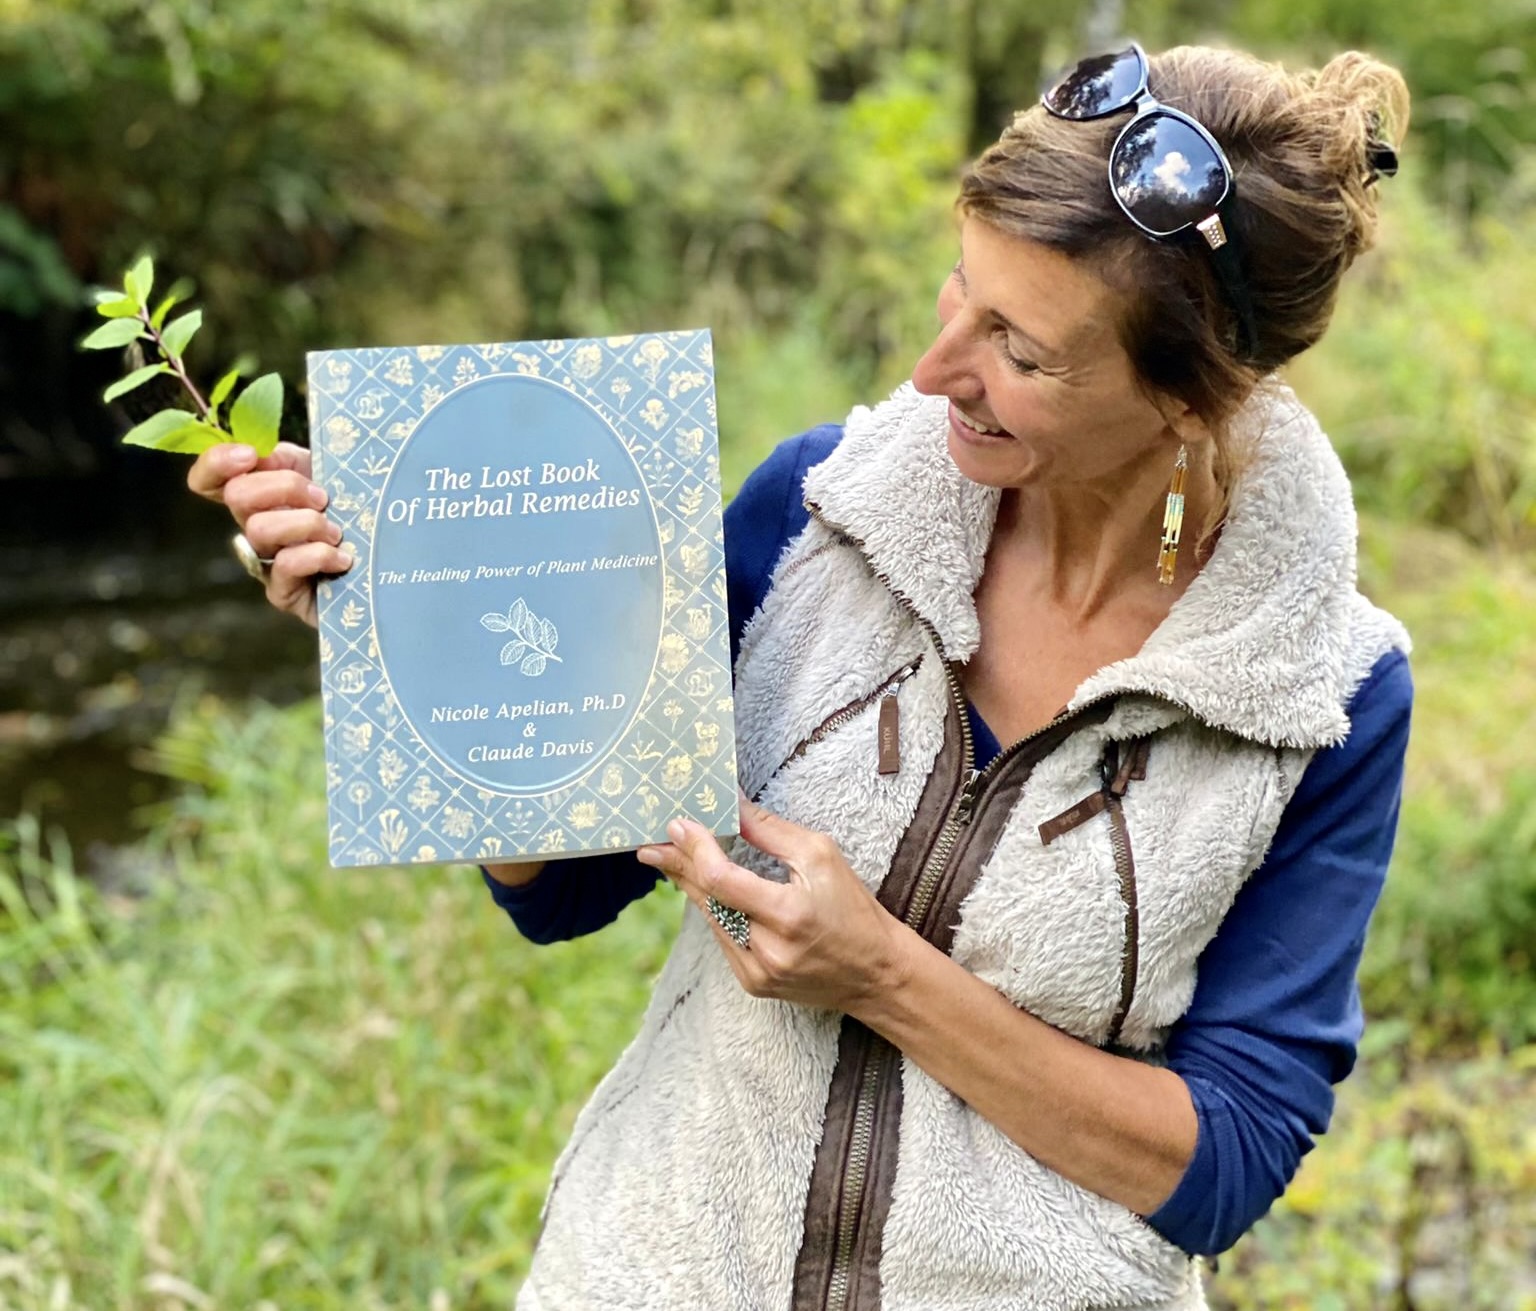 Nicole Apelian holding The Lost Book of Herbal Remedies